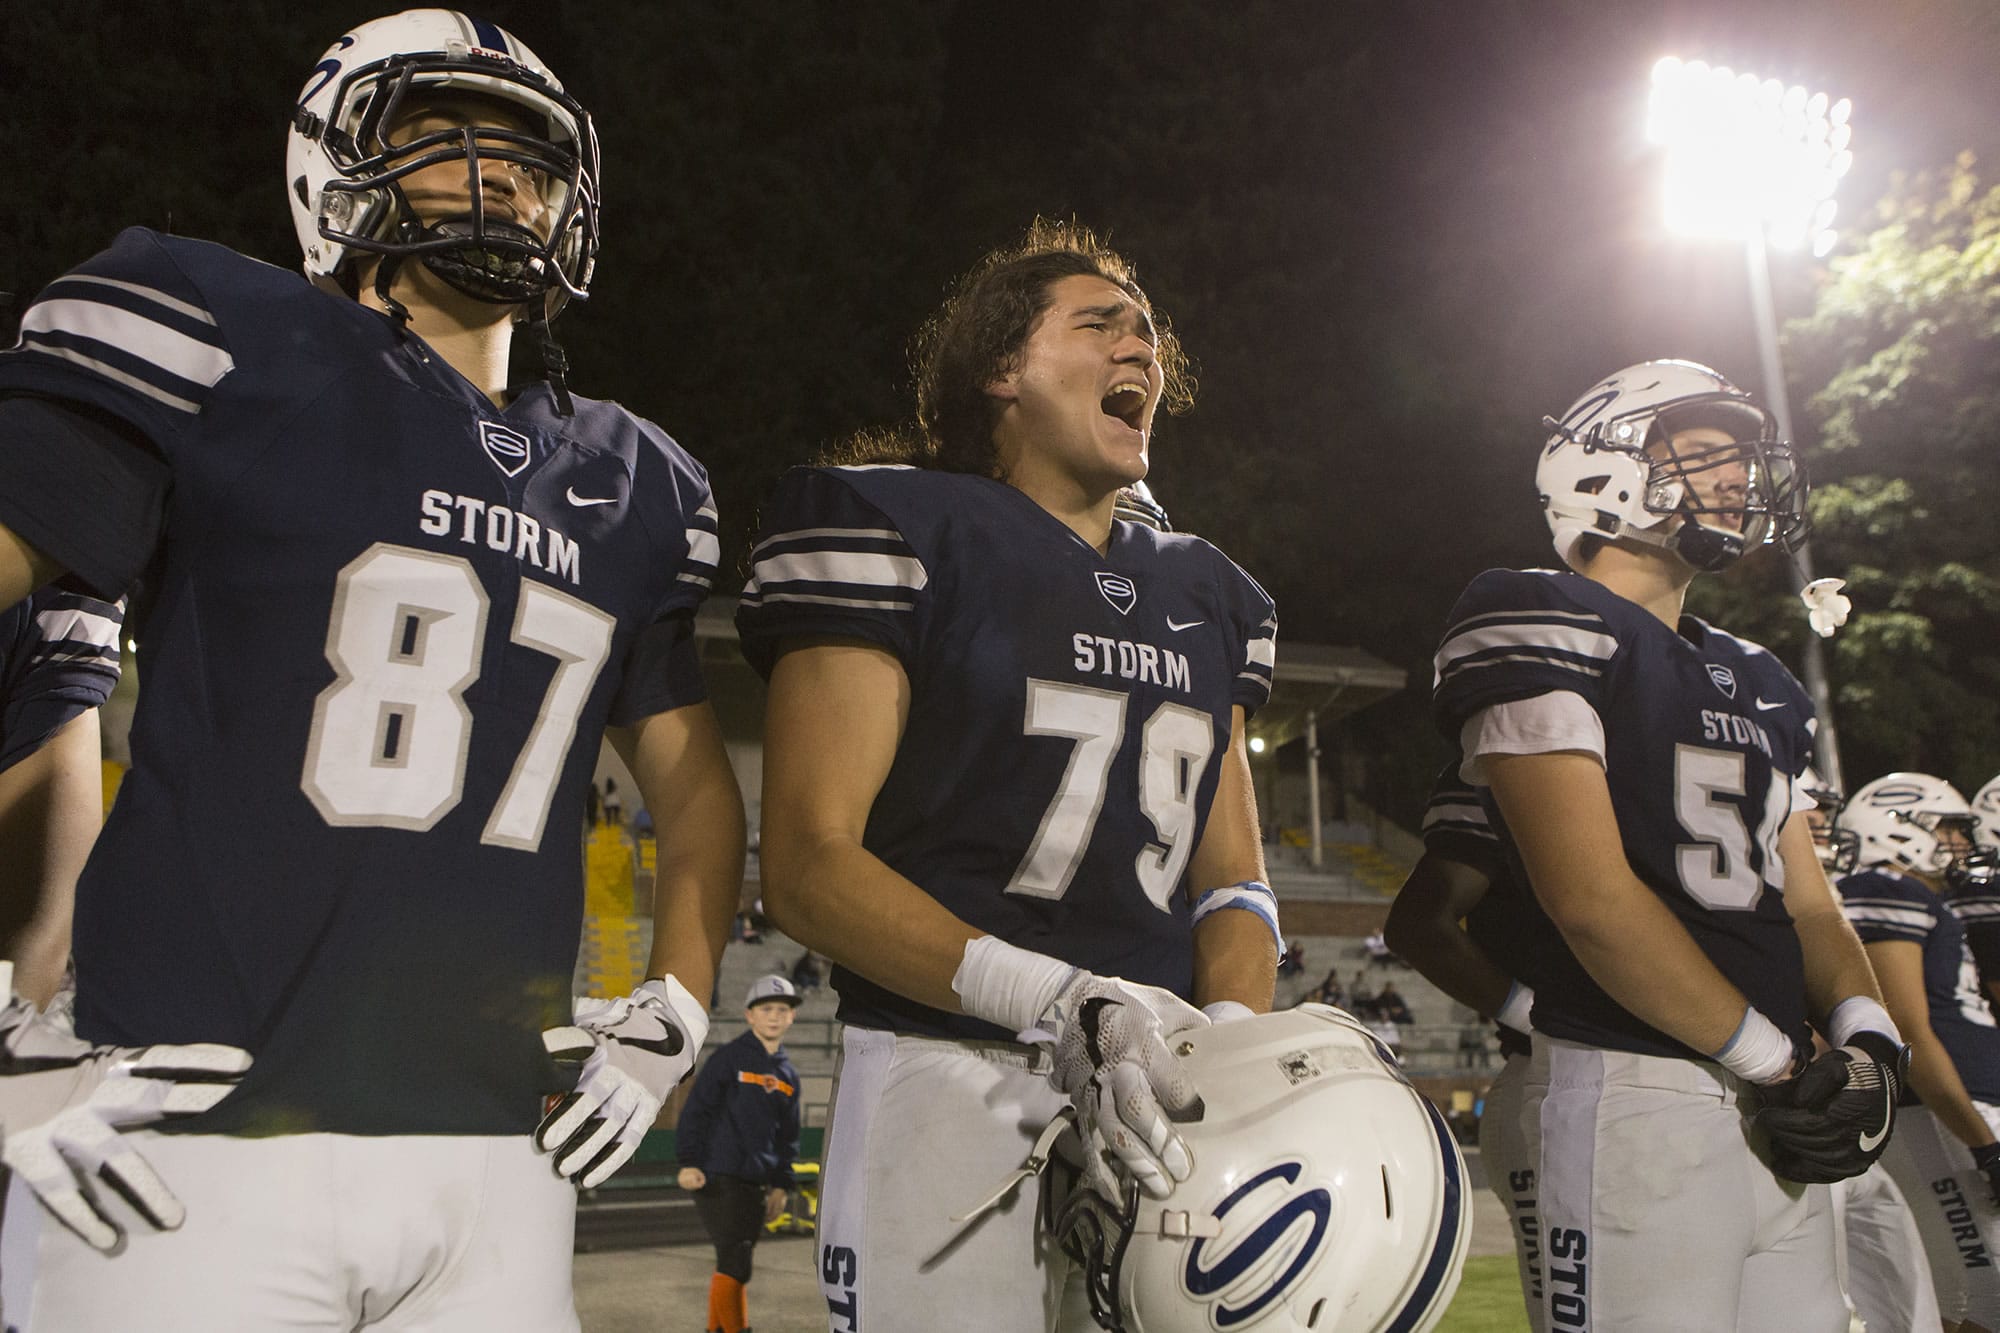 Storm Levi Hoppes (79) amps up his teammates during the Friday night football ball game at Kiggins Bowl between Skyview High School and Eastside Catholic School on Sept. 8, 2017.